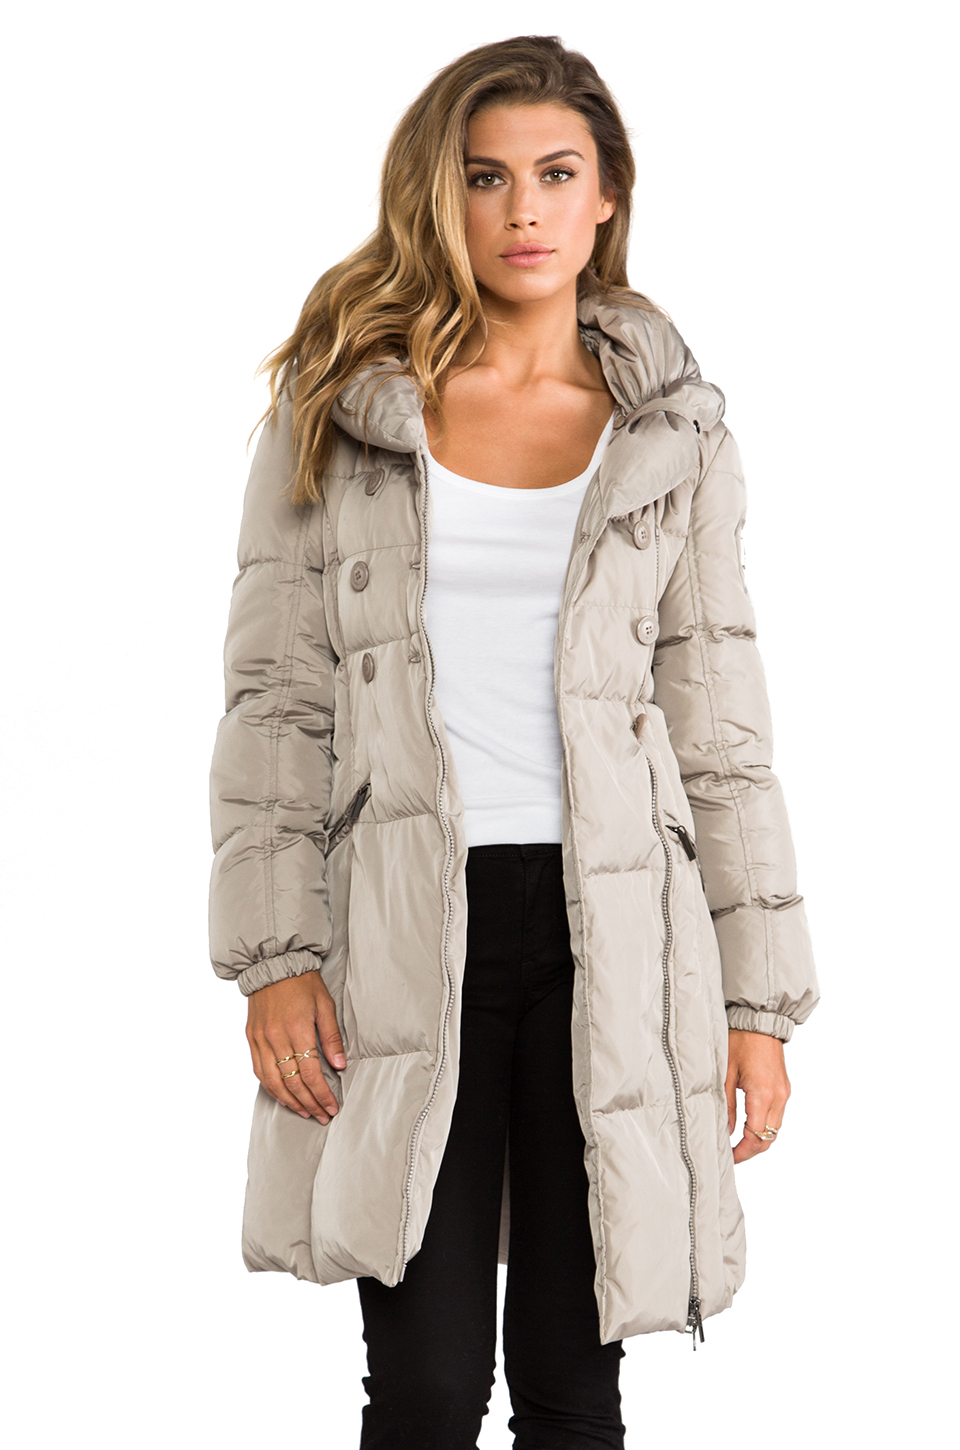 Lyst - Add Down Coat with Fur Collar in Beige in Gray